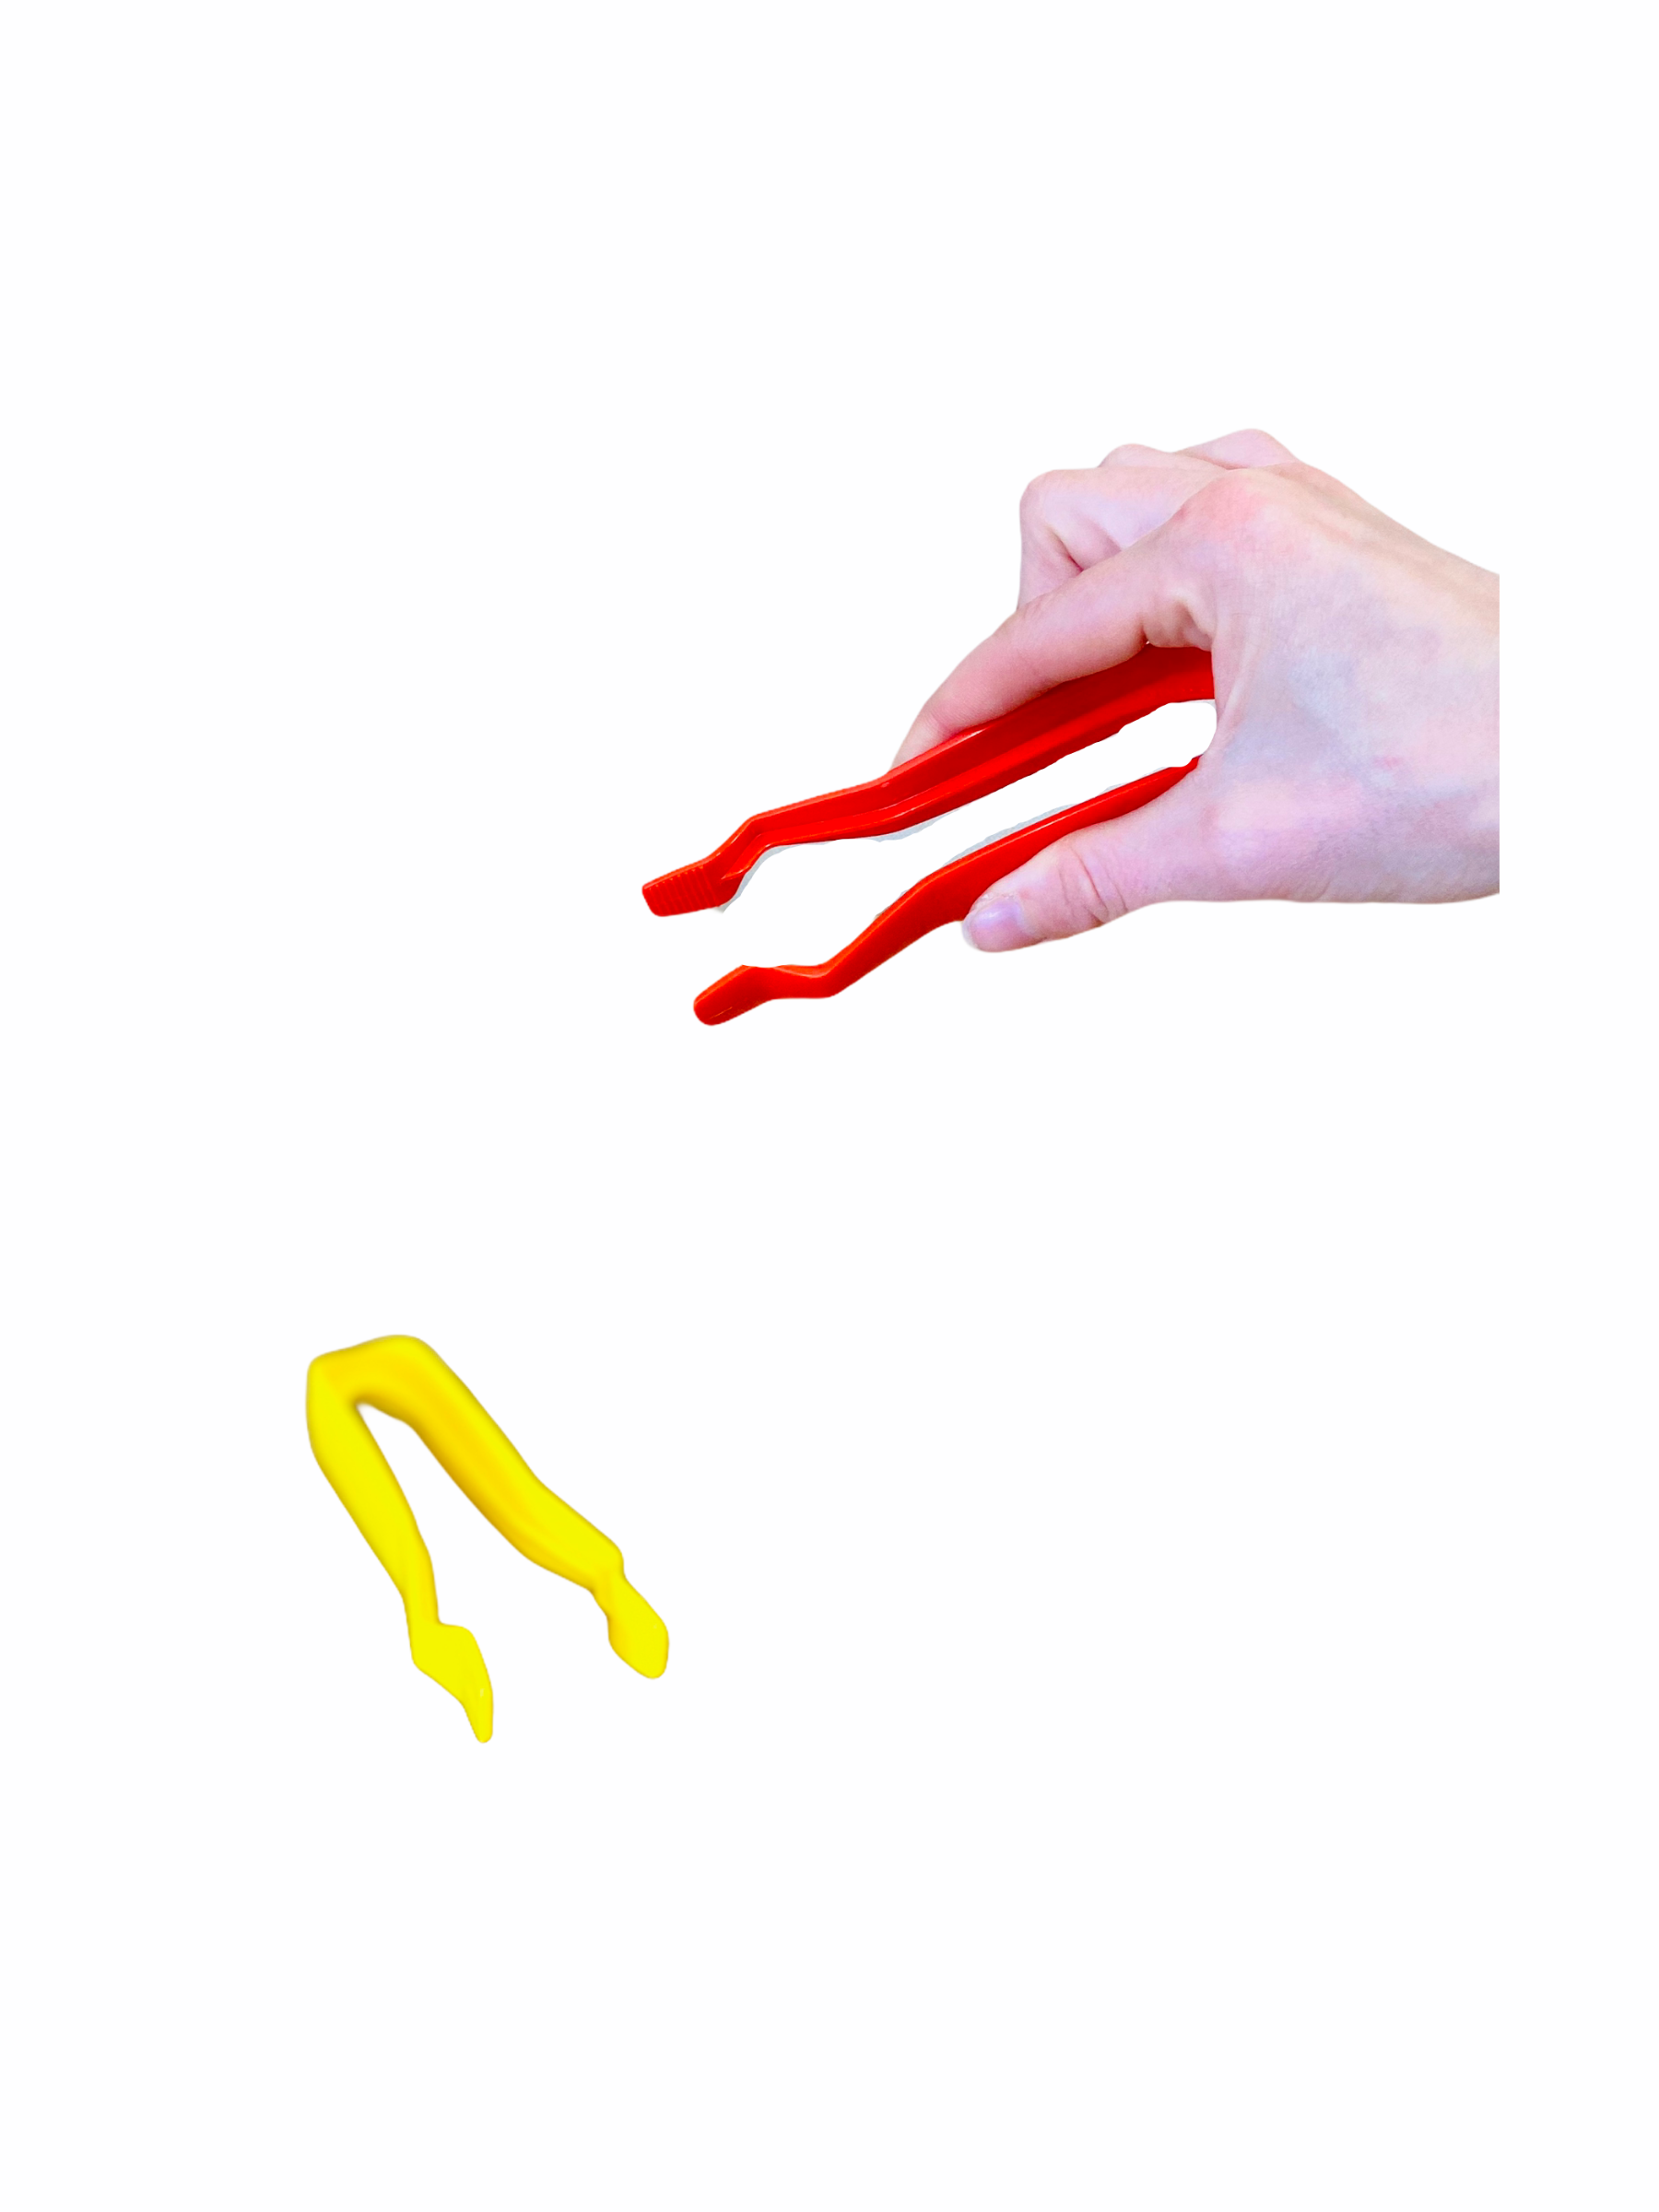 Hand holding red EC Jumbo Tweezers with yellow one in front of it on white background